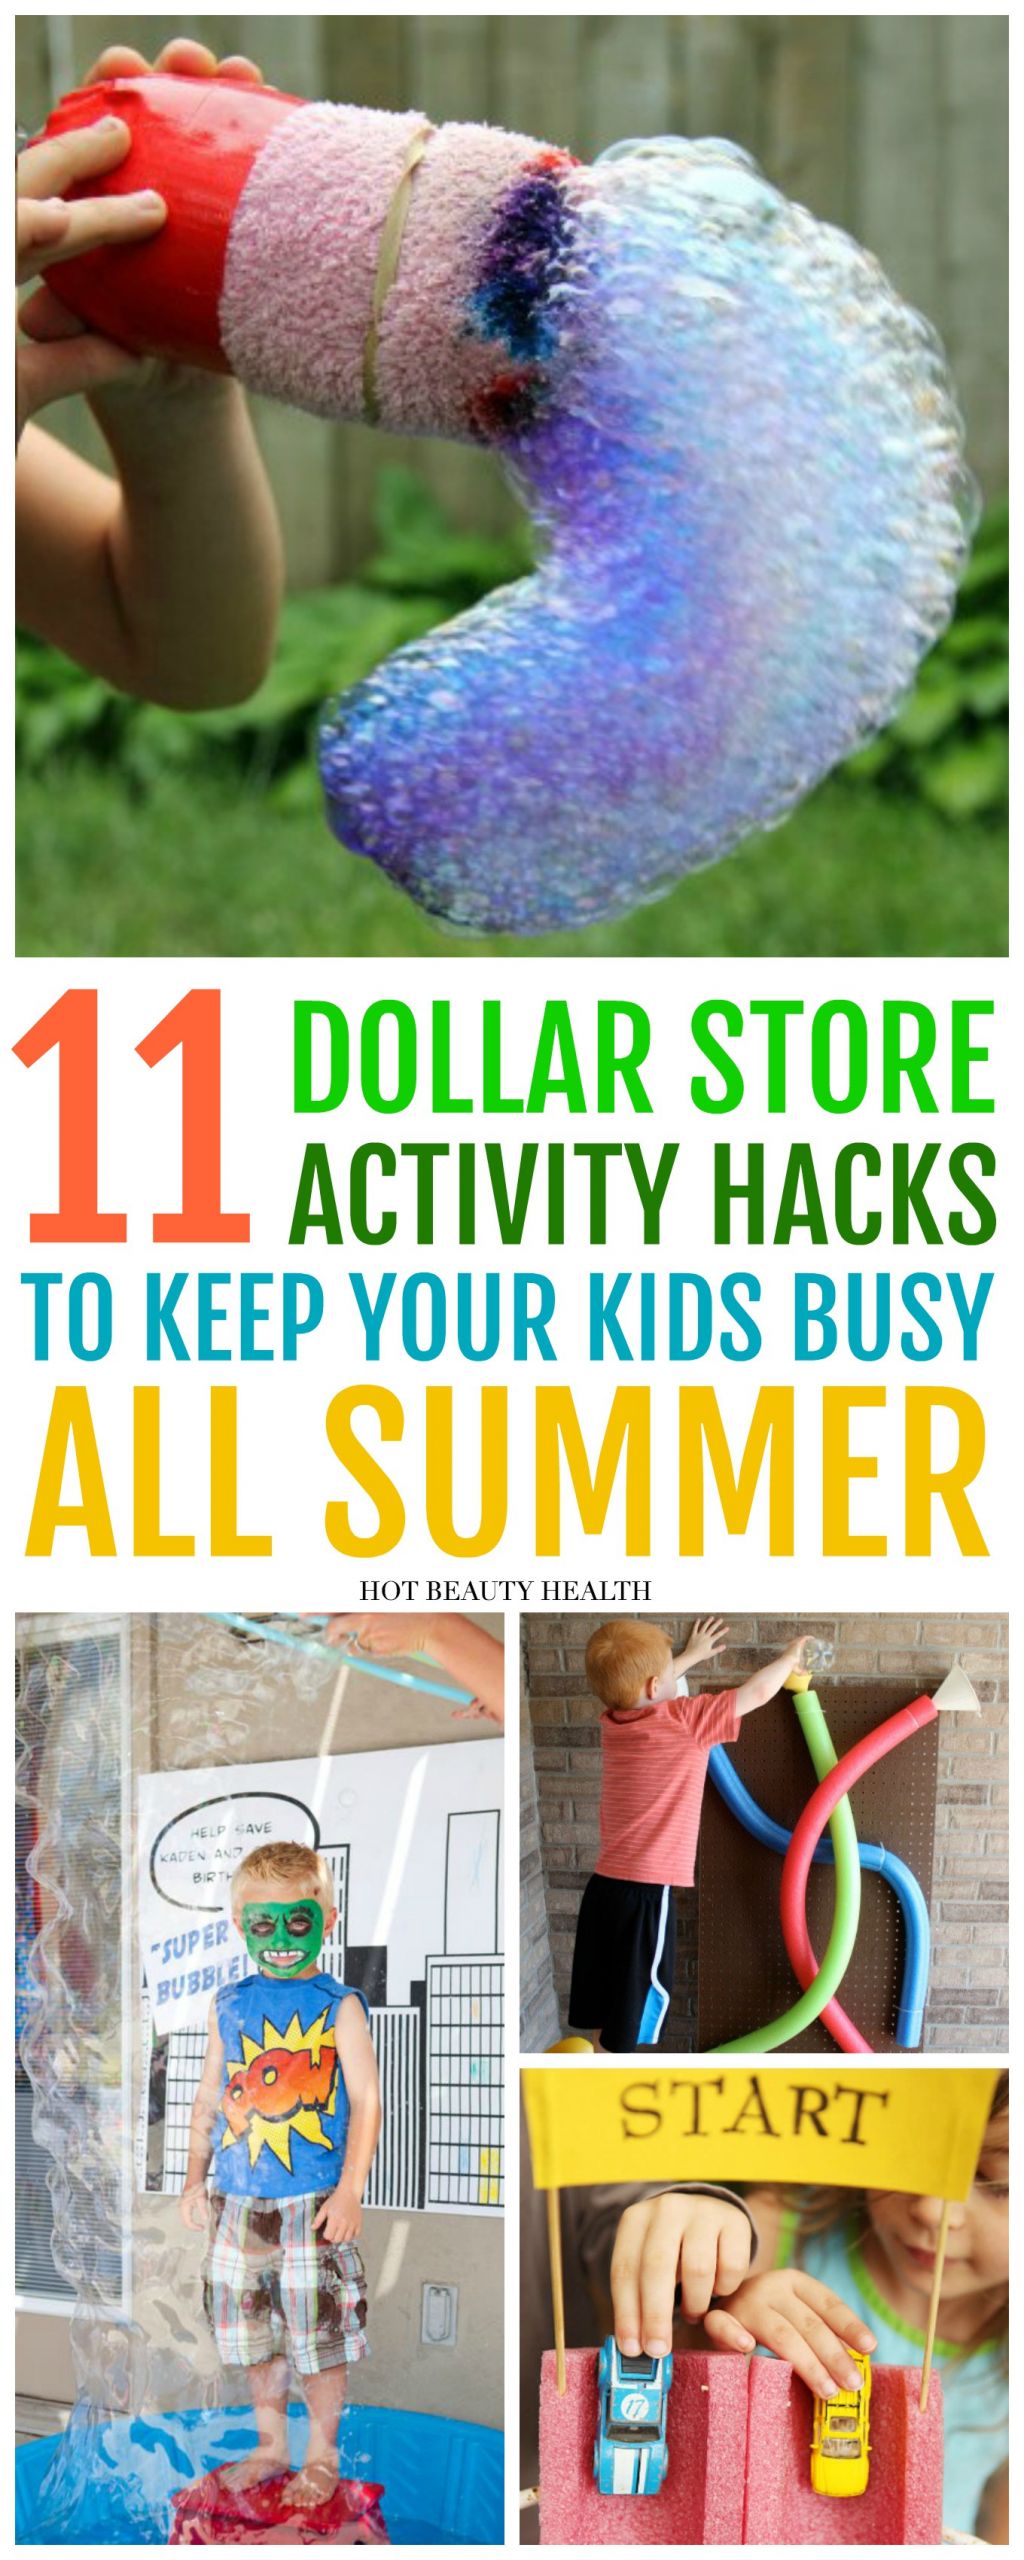 Fun Summer Crafts
 11 Fun Activities to DIY This Summer From The Dollar Store